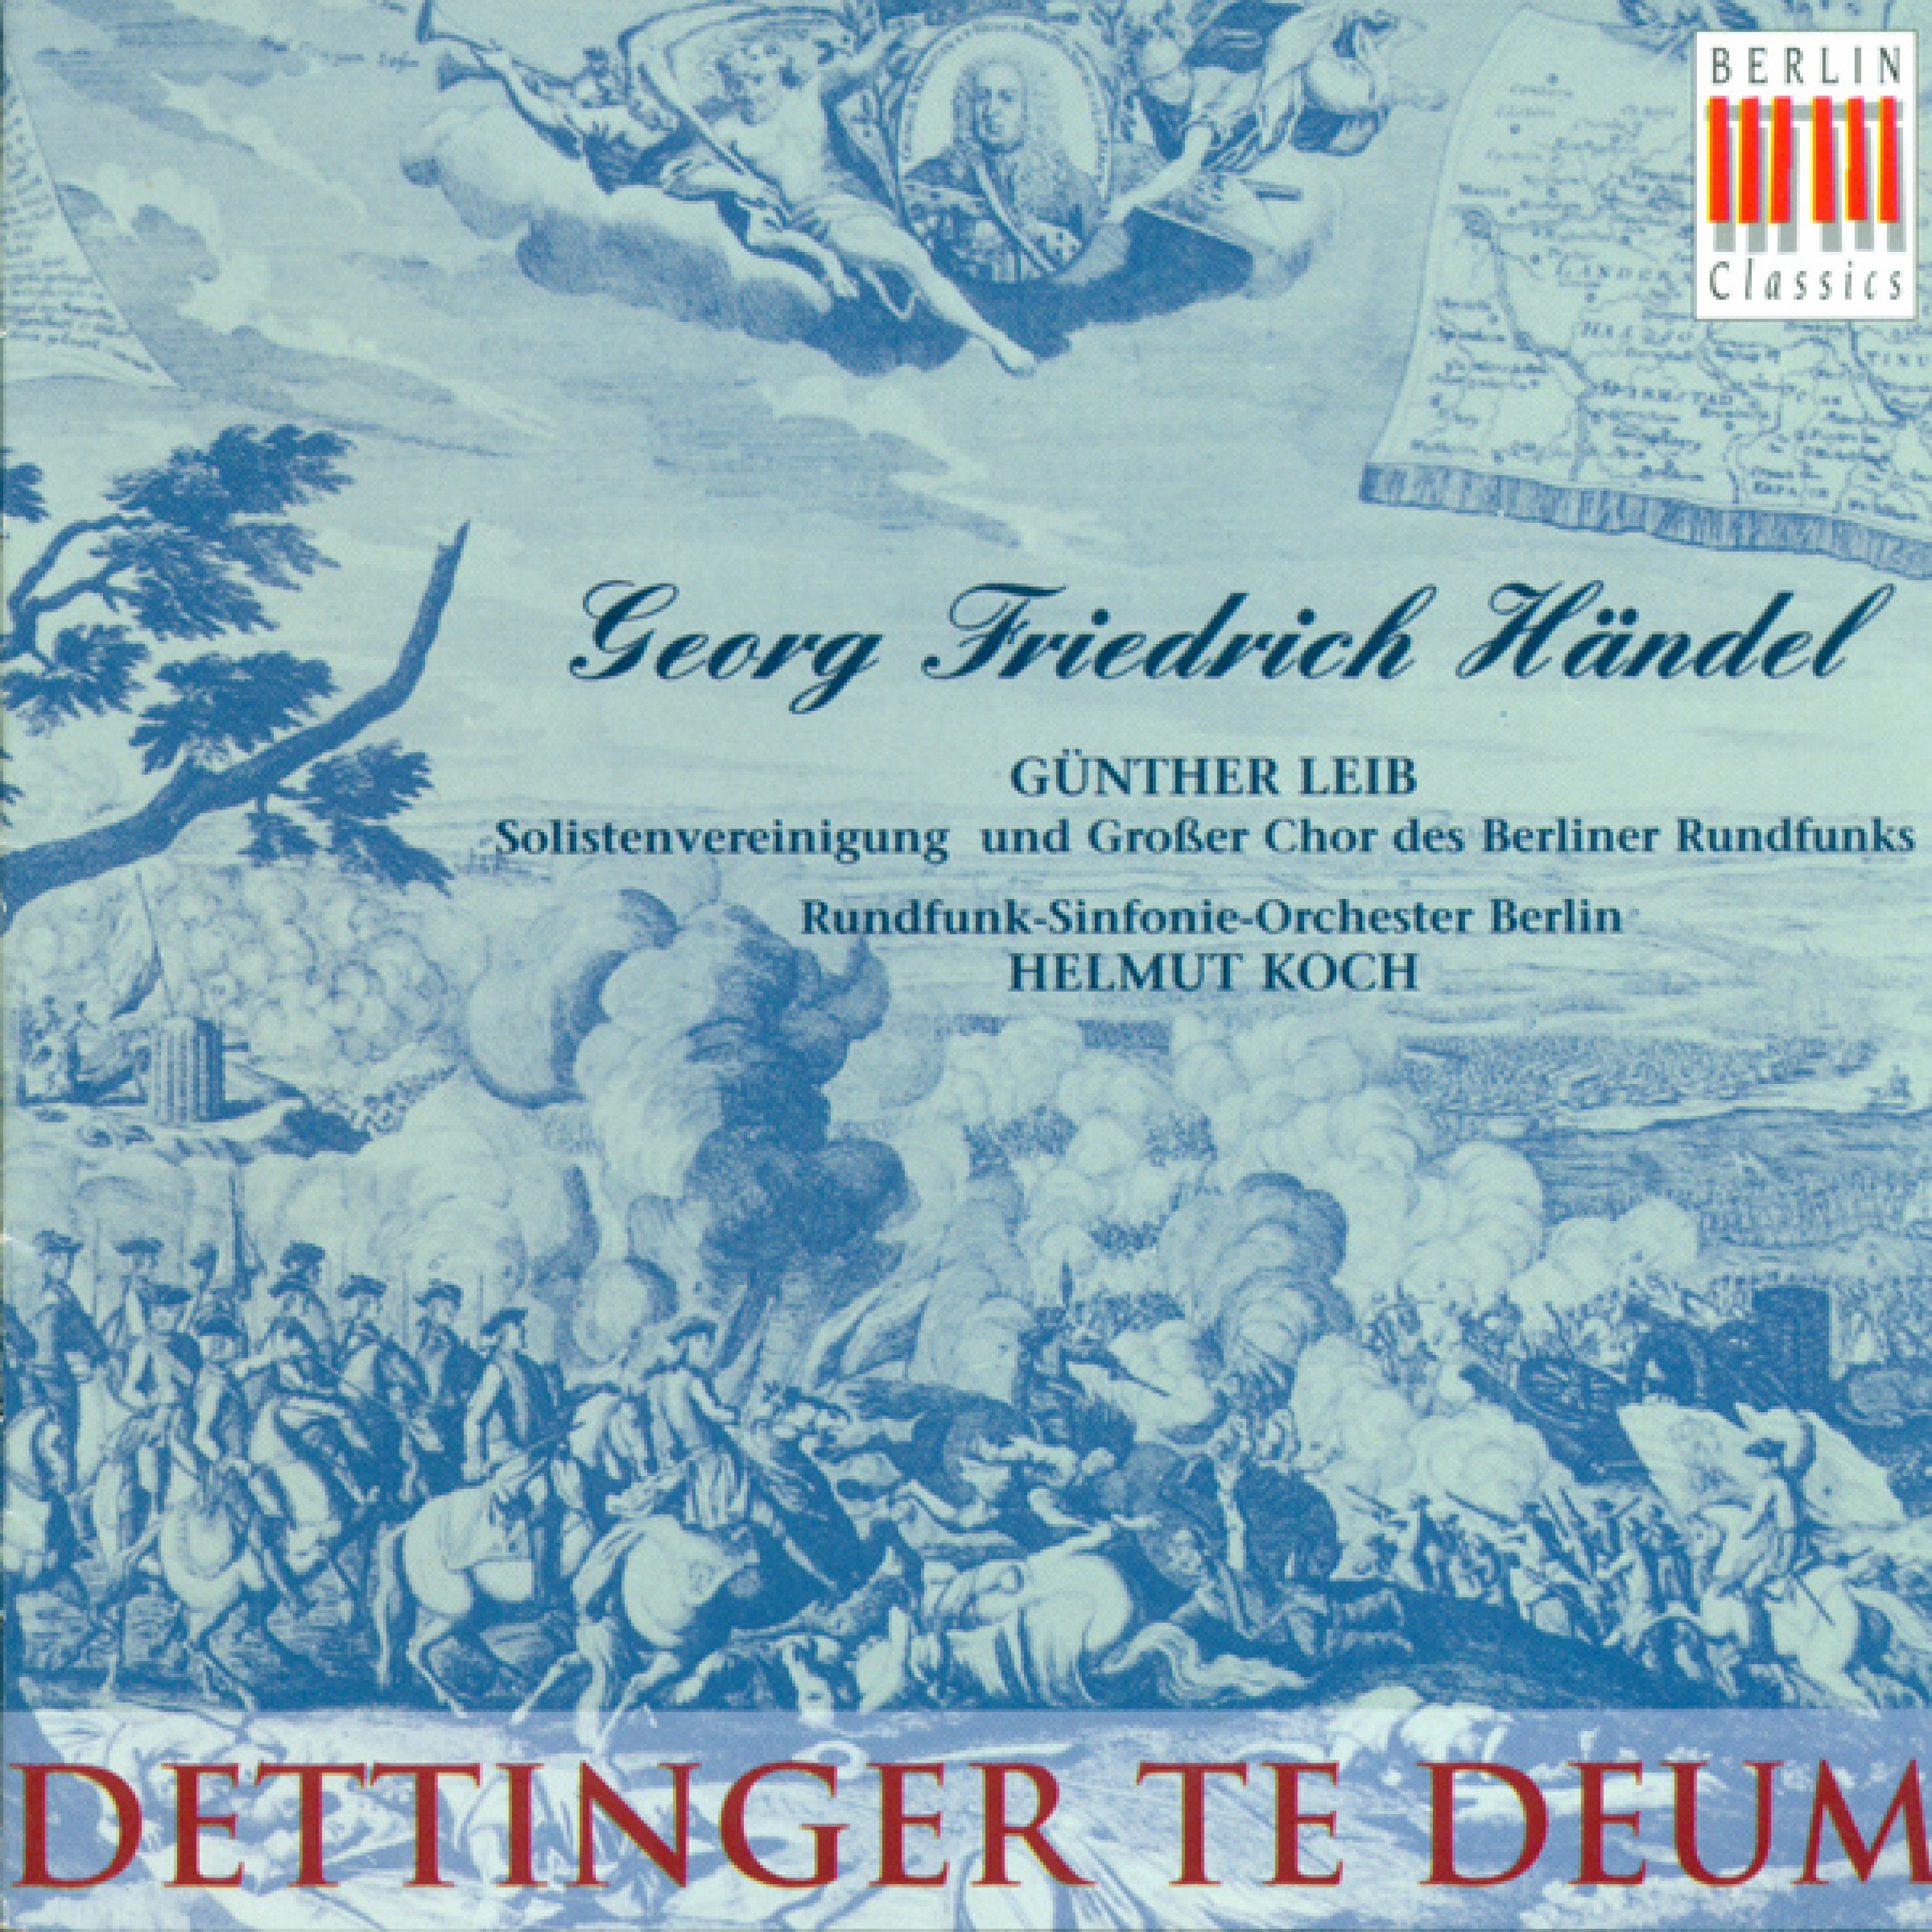 Te Deum in D major, HWV 283, "Dettingen": Vouchsafe, O Lord, to keep us this day